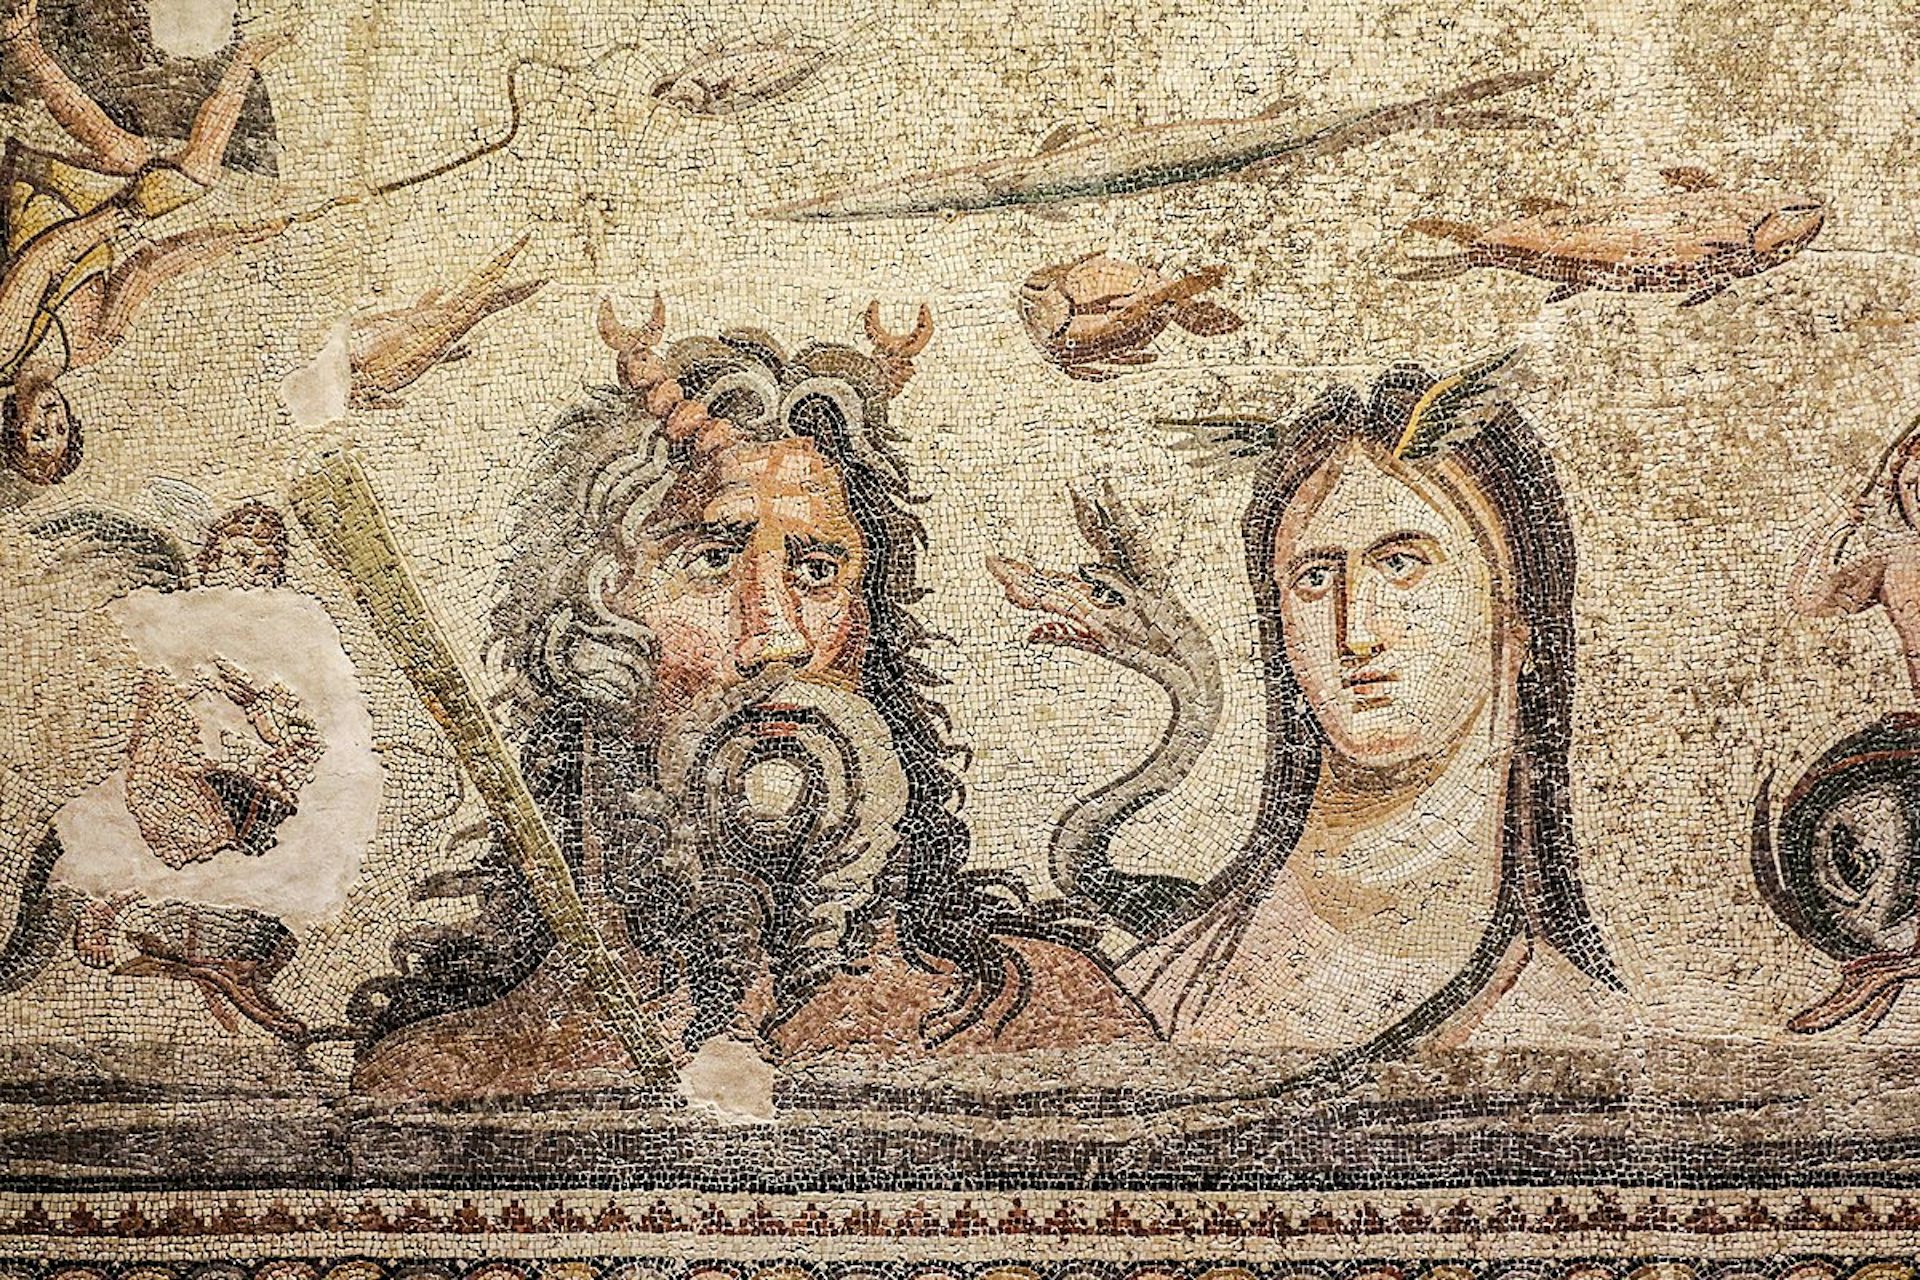 Detail from a mosaic depicting Oceanus and Tethys